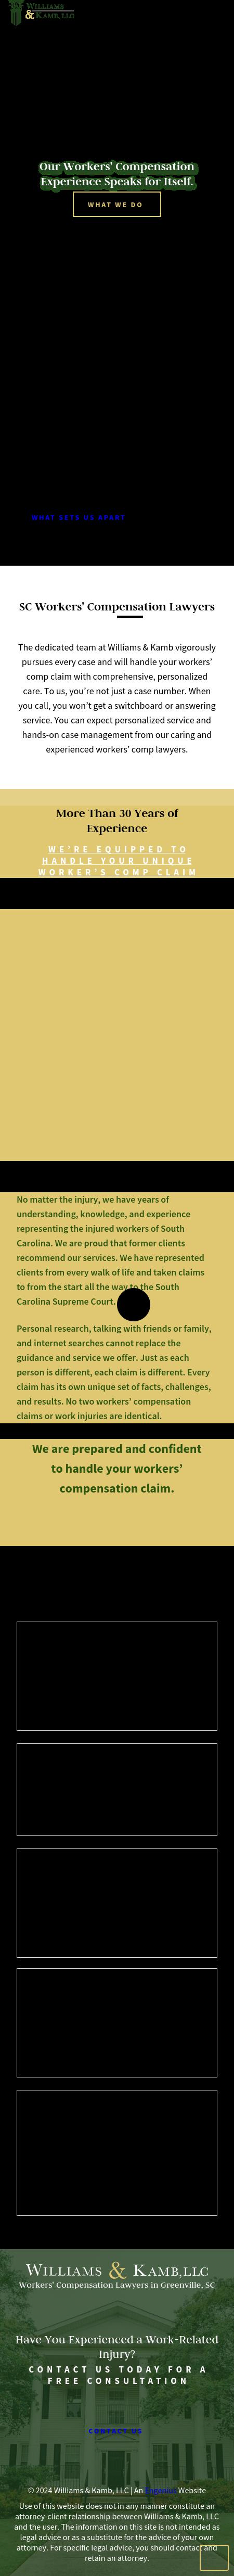 Kathryn Williams, P.A. - Greenville SC Lawyers